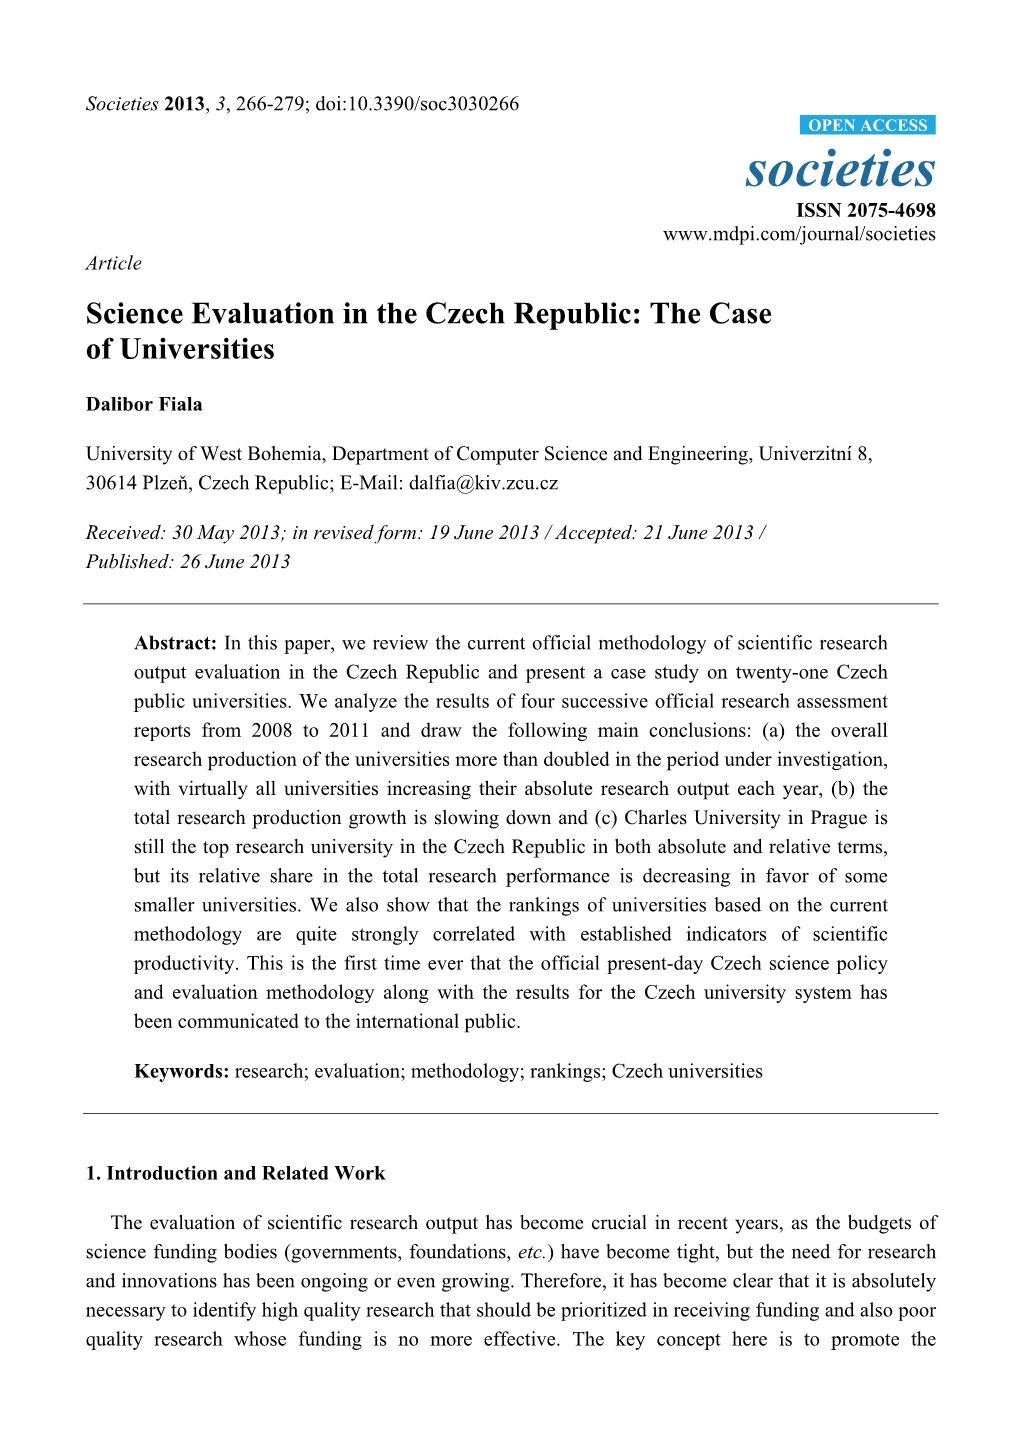 Science Evaluation in the Czech Republic: the Case of Universities